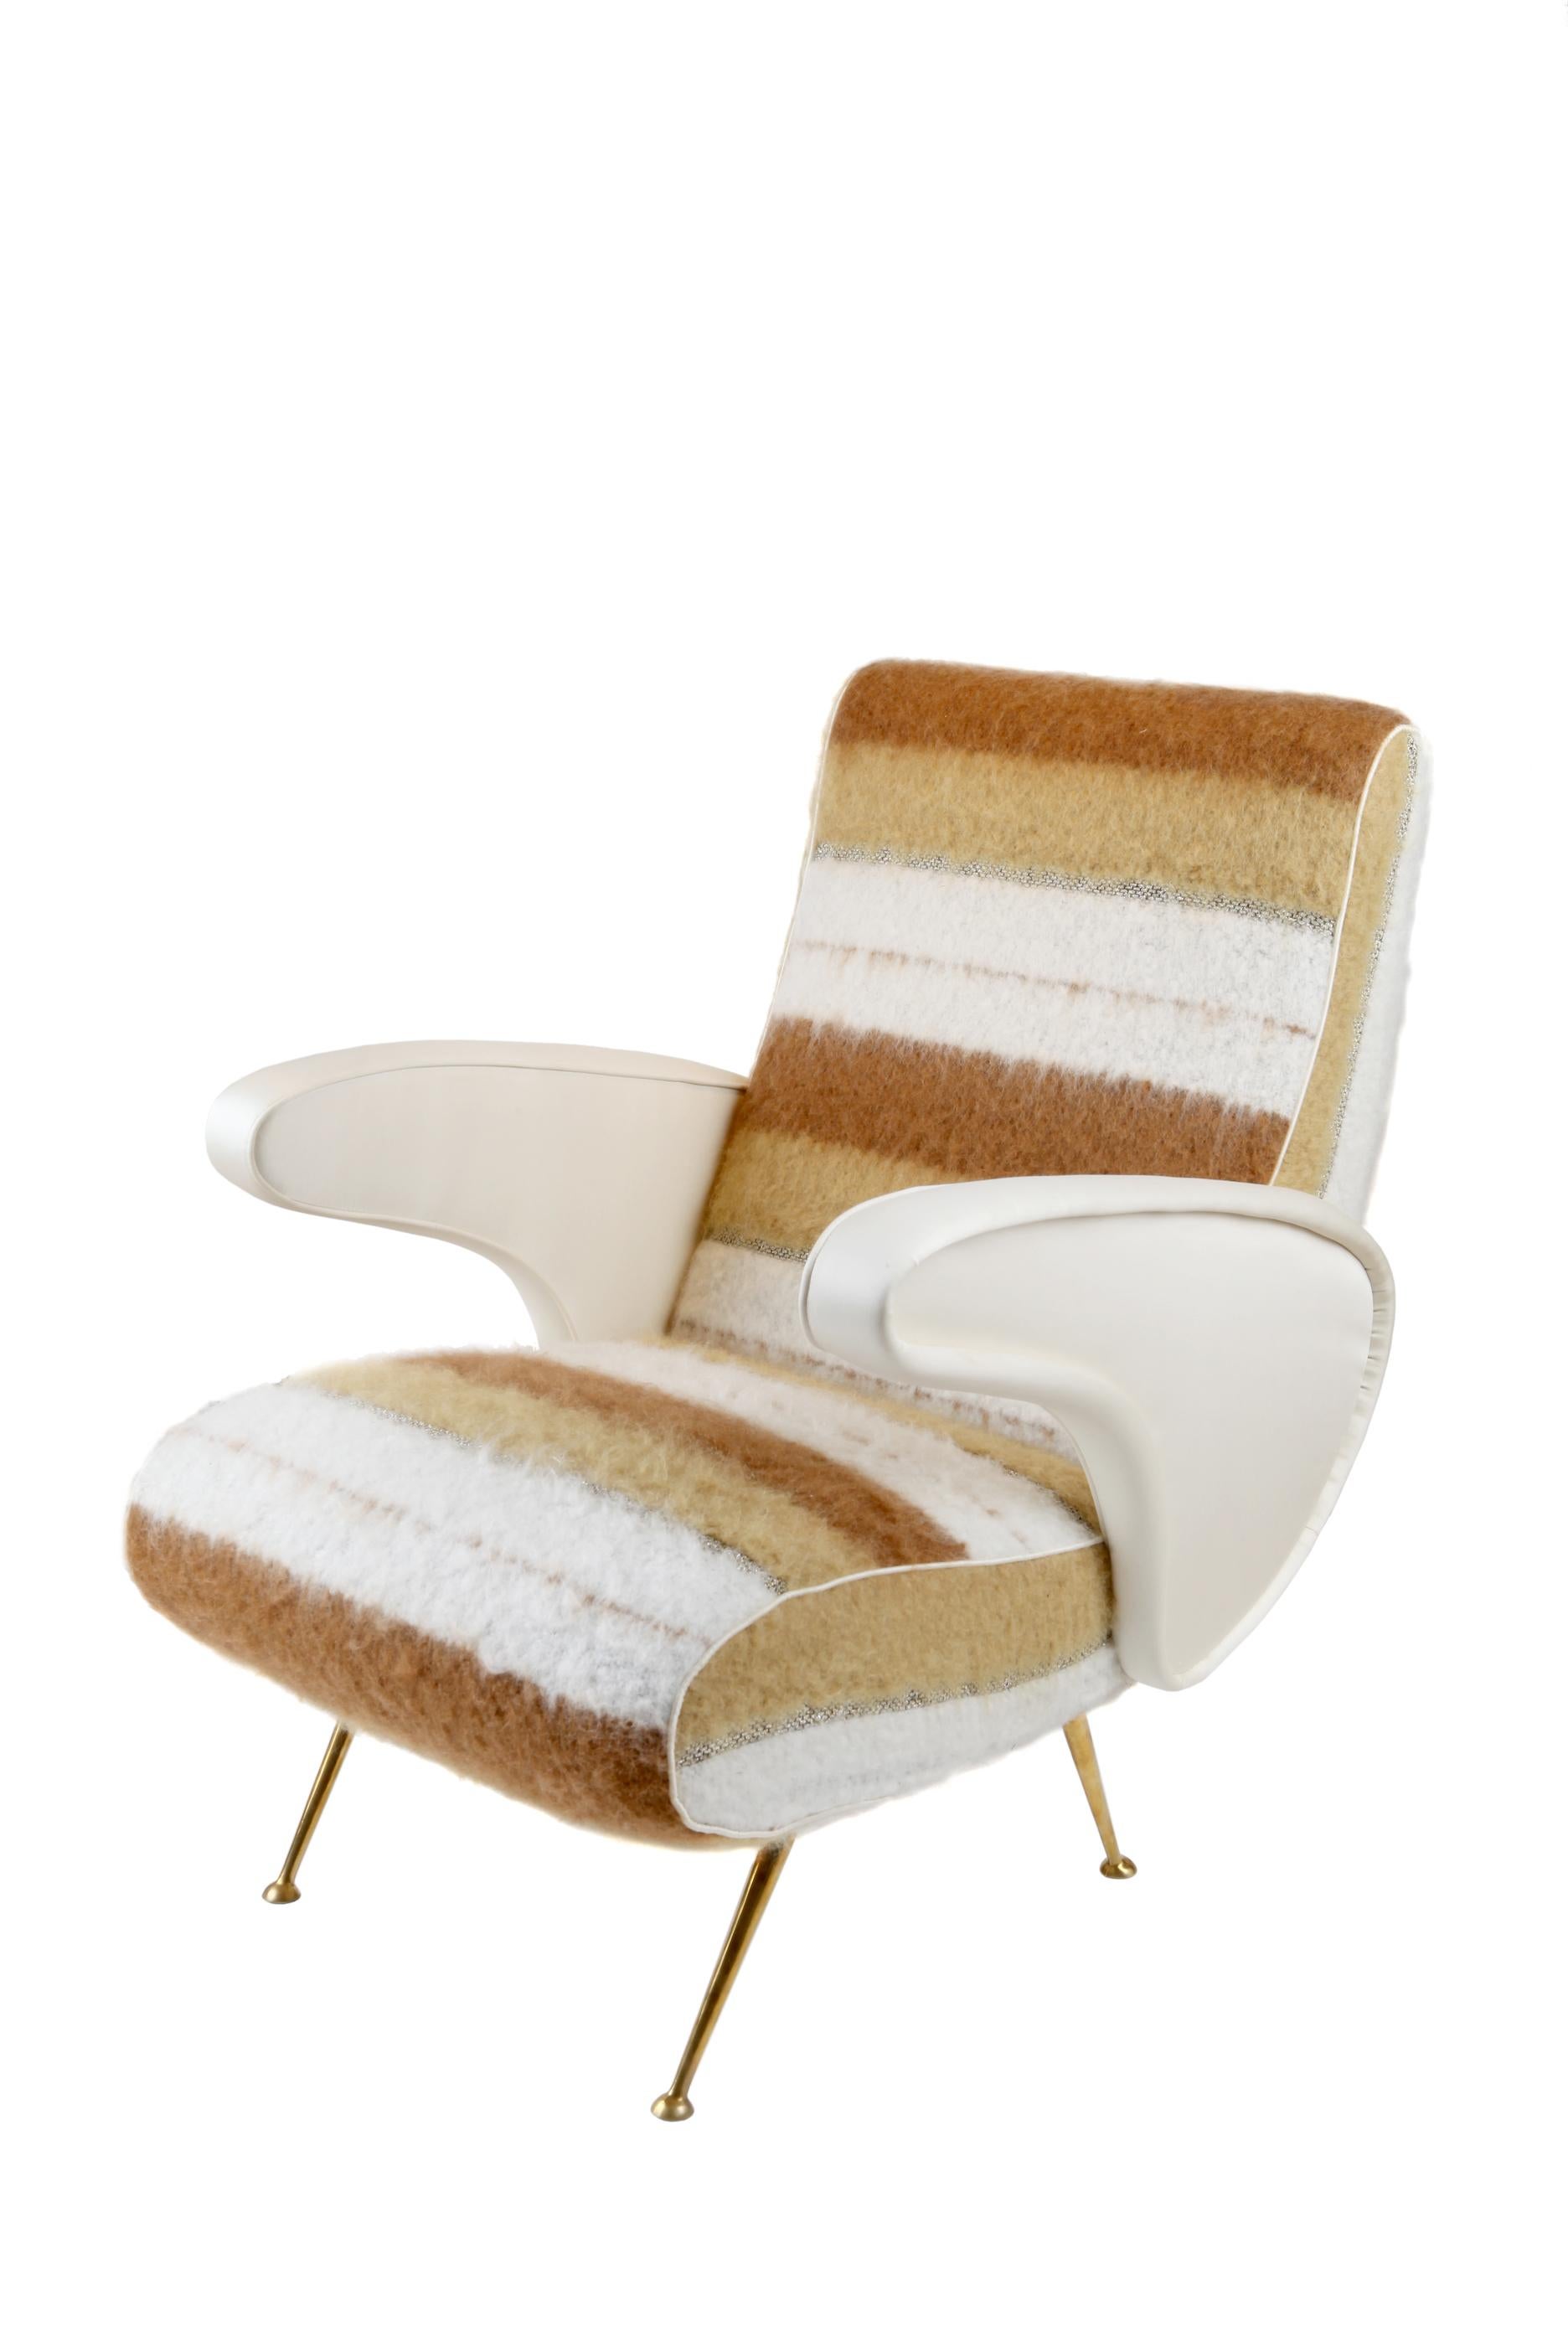 Pair of Italian, Mid-Century Modern armchairs reupholstered in Dedar Oz fabric. A barre stripe in two colours alternated with a flat gold and silver yarn. The special combed finishing process gives a soft and plush feel.

All of our chairs are